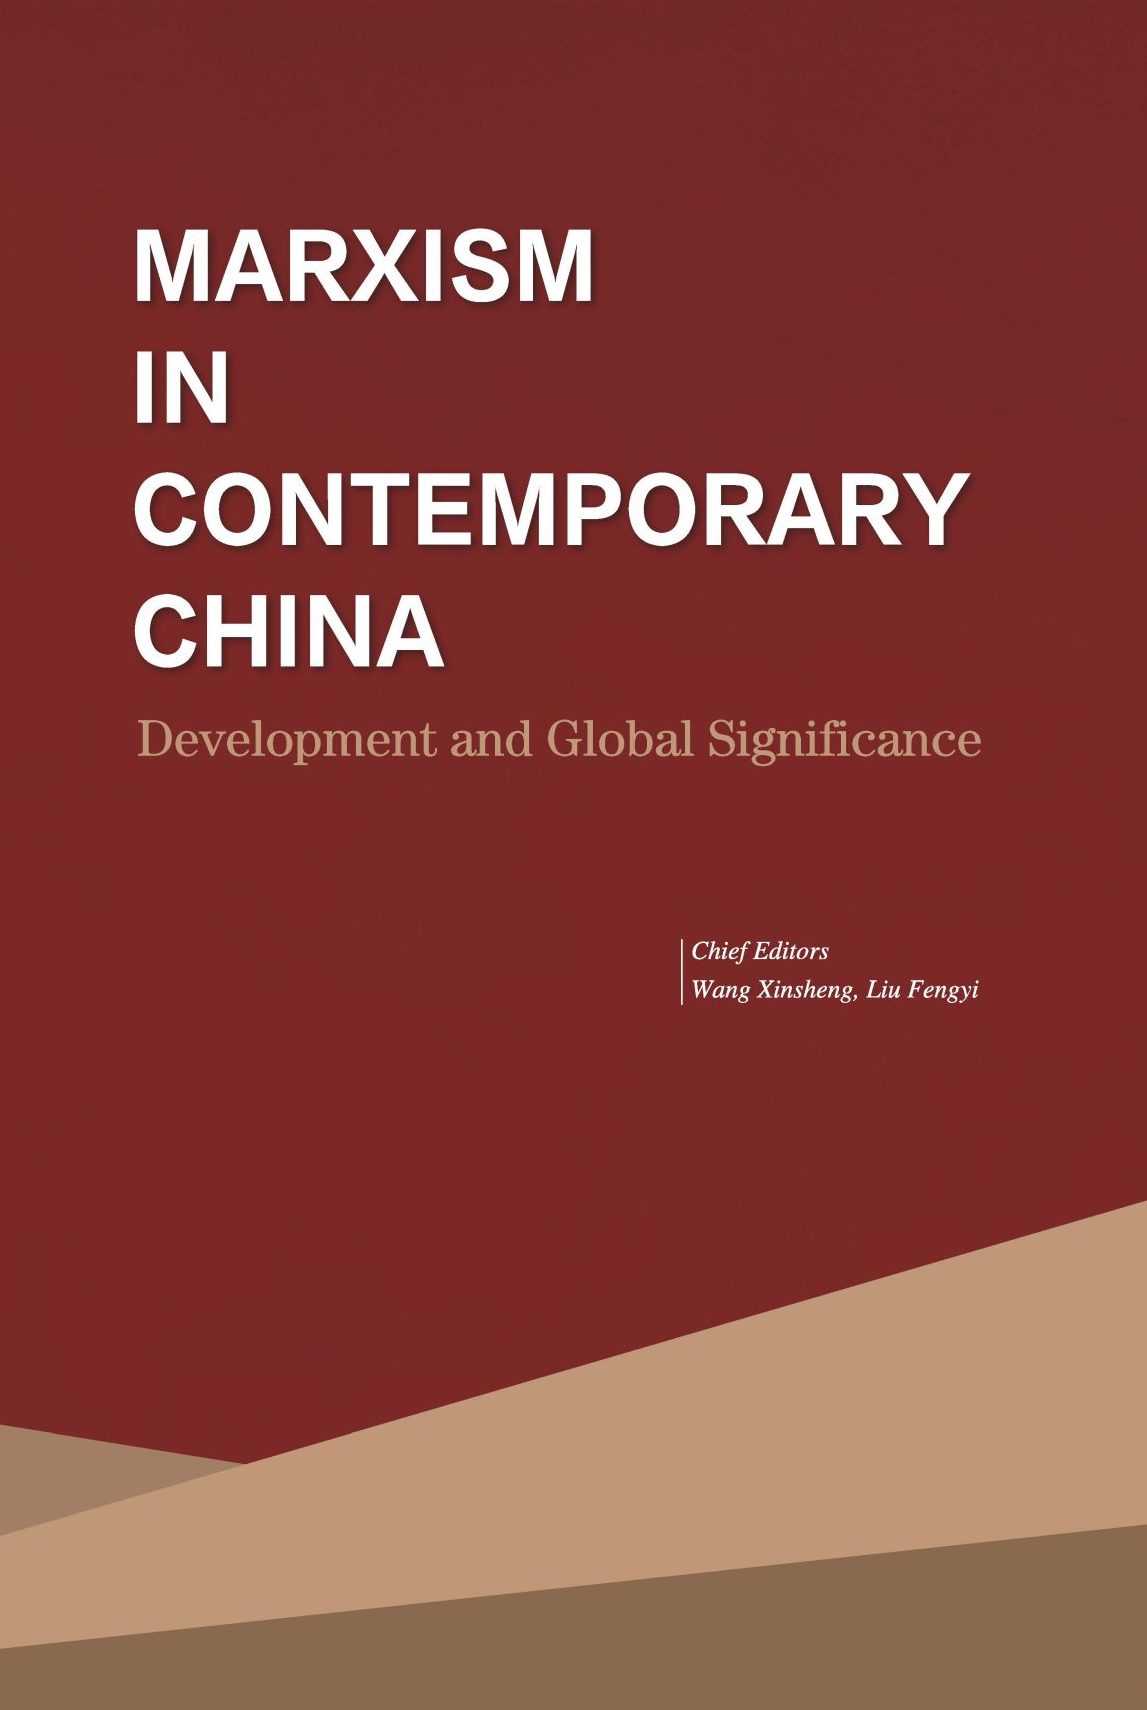 Marxism in Contemporary China: Development and Global Significance